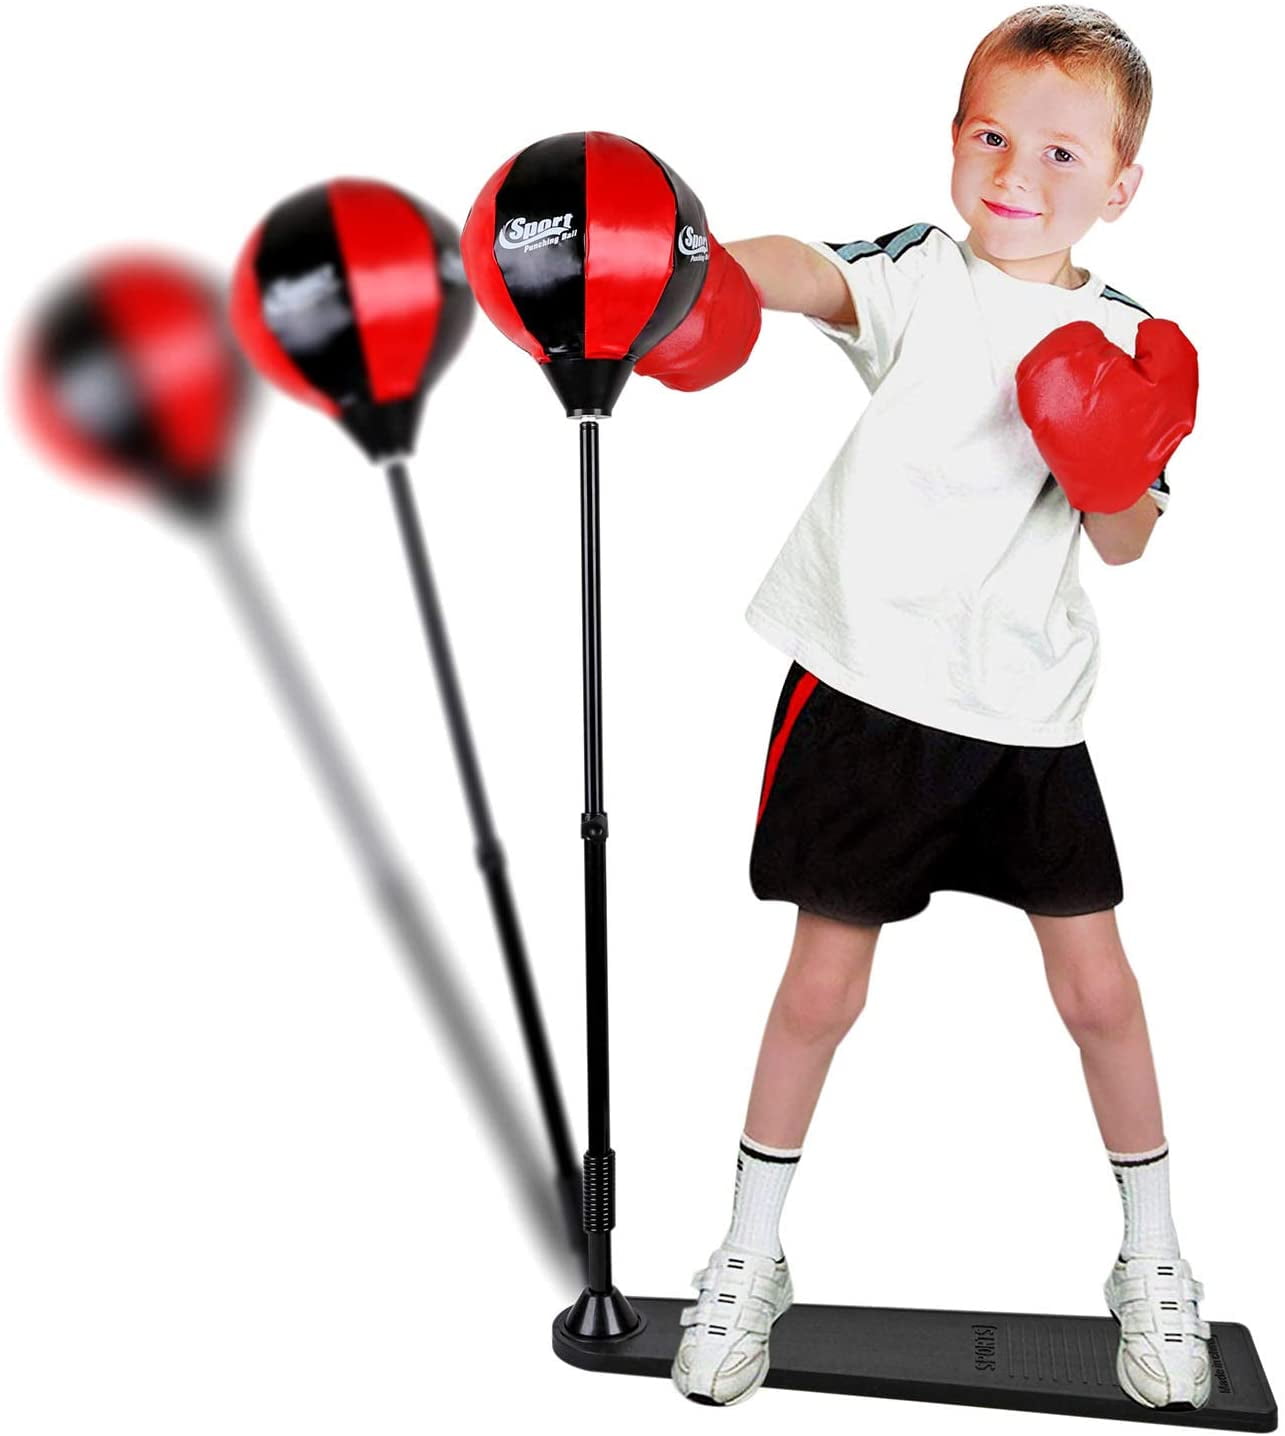 KIDS BOXING UNIFORM SET 2 TOP & SHORTS WITH BOXING GLOVES AGE  3-14 YEARS R A X 